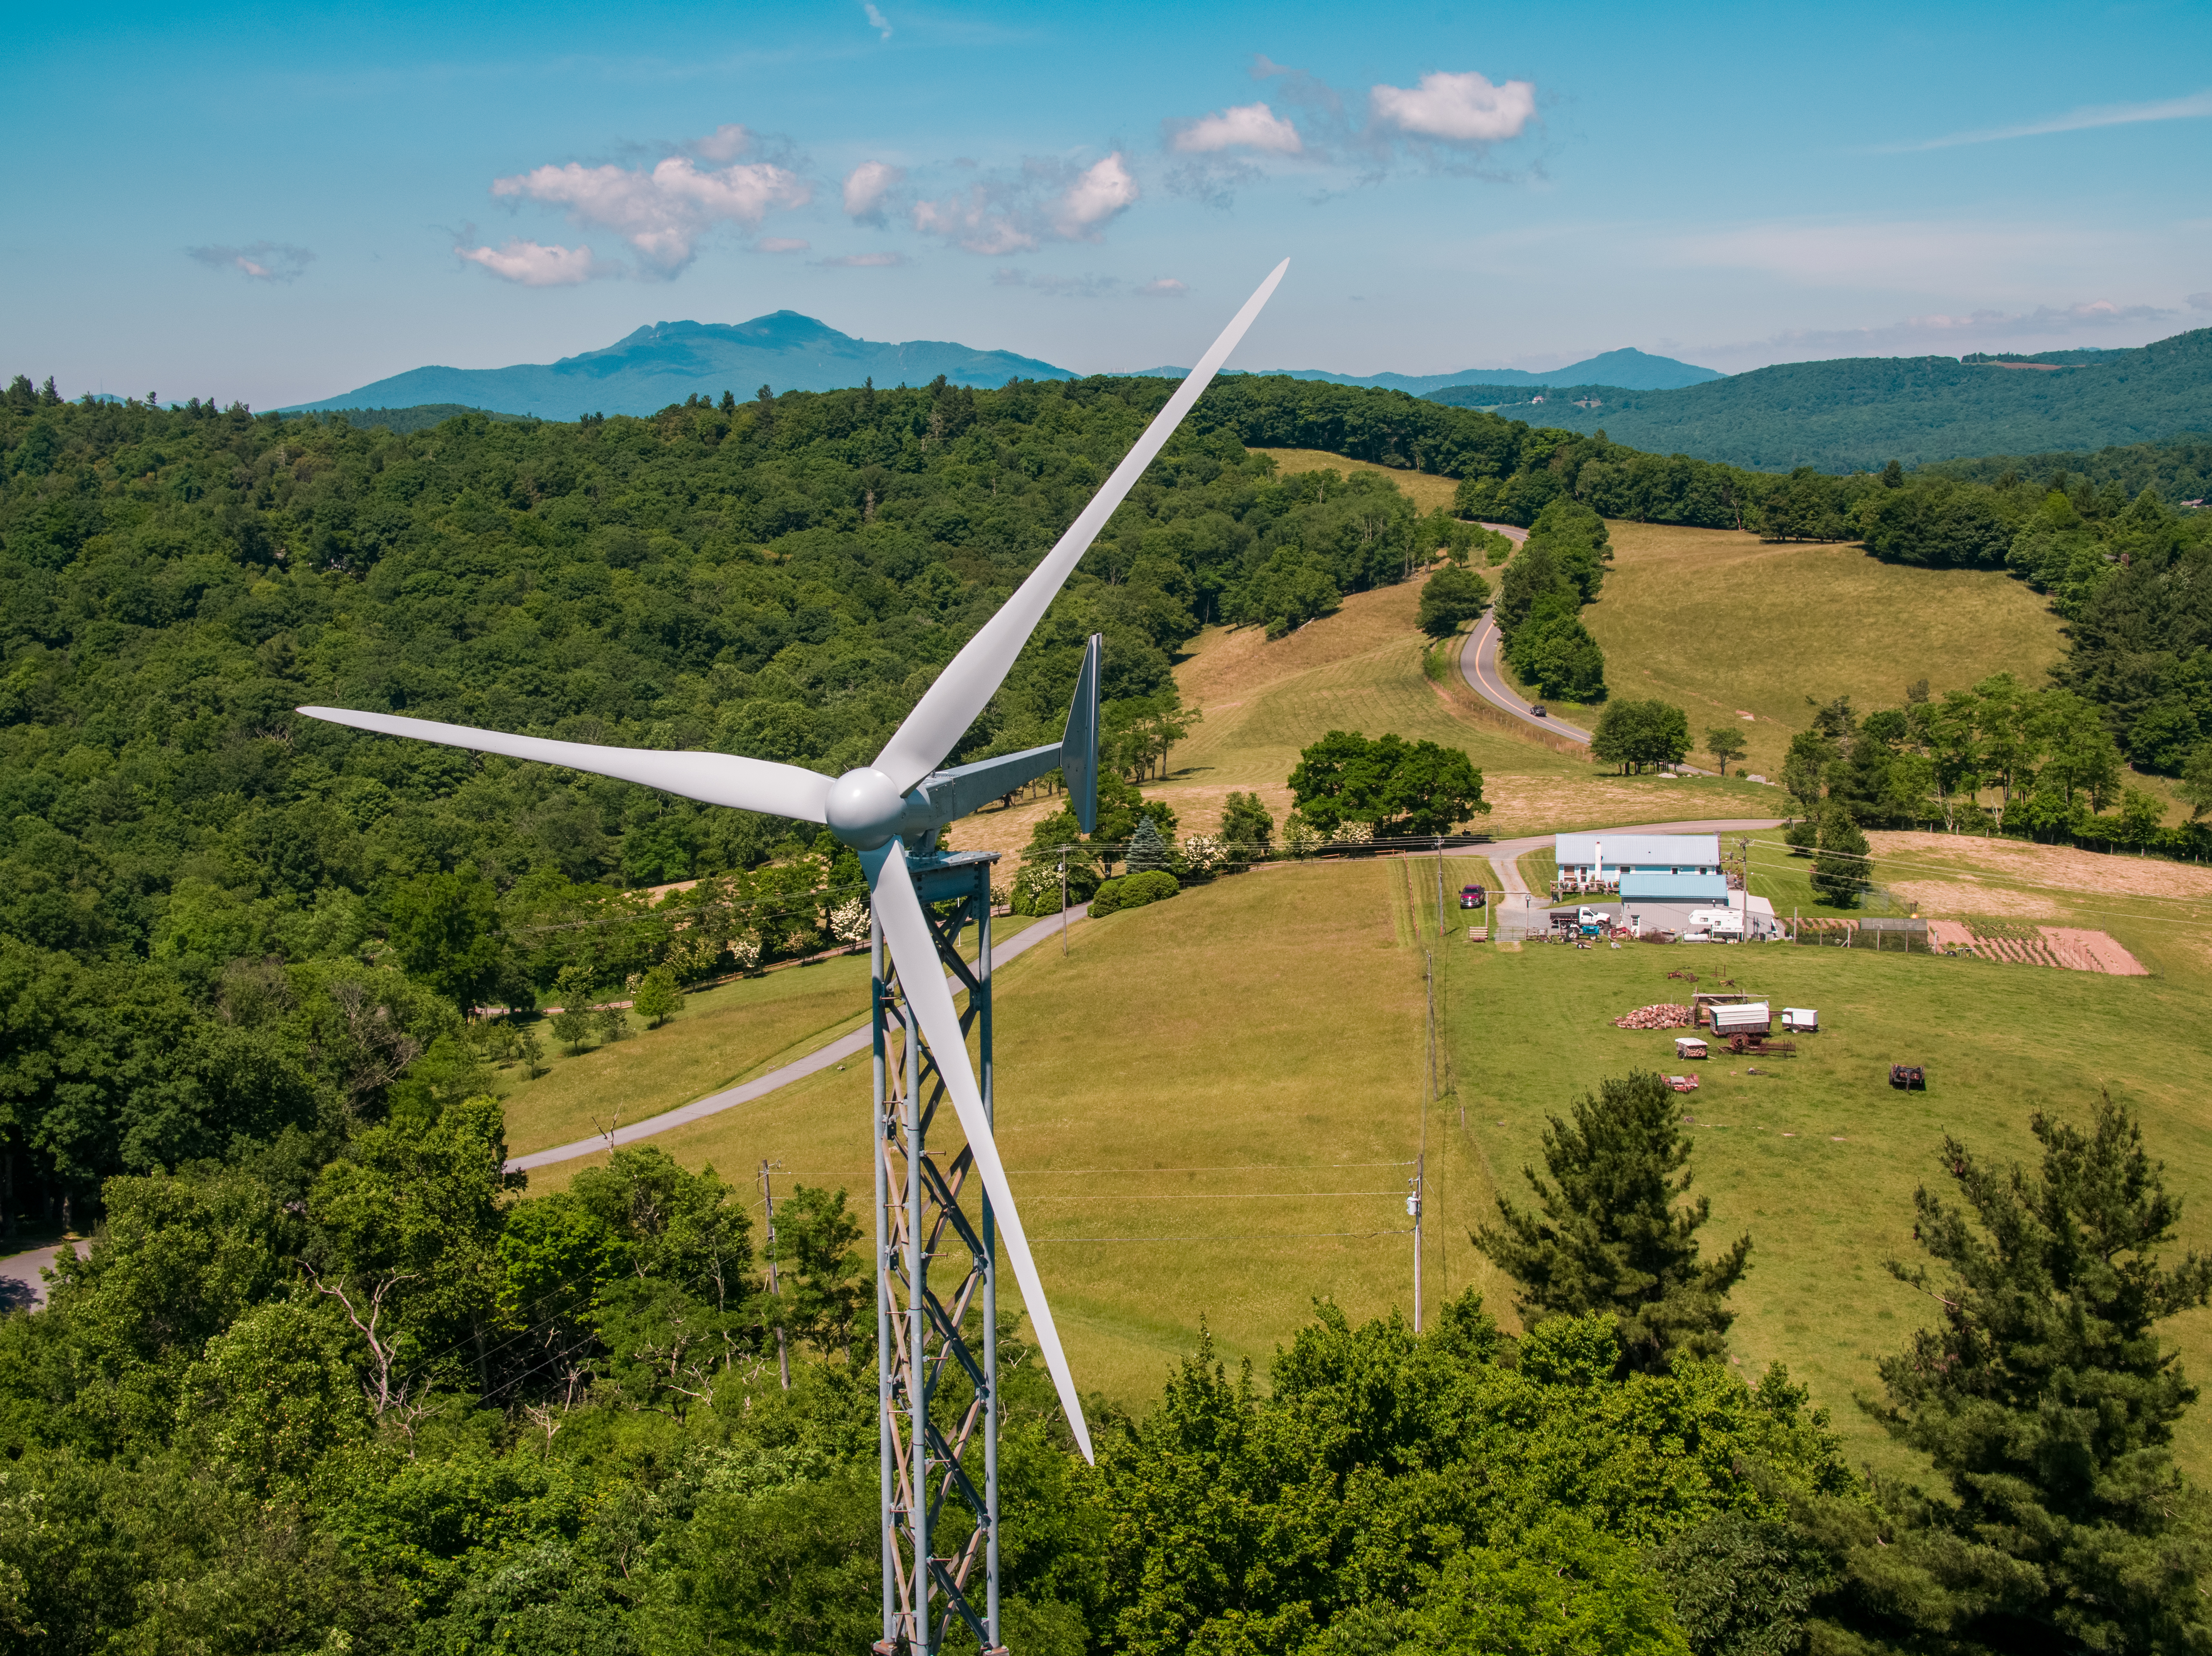 A small wind turbine in the foreground on a farm surrounded by forested mountains, with a country road winding away into the background